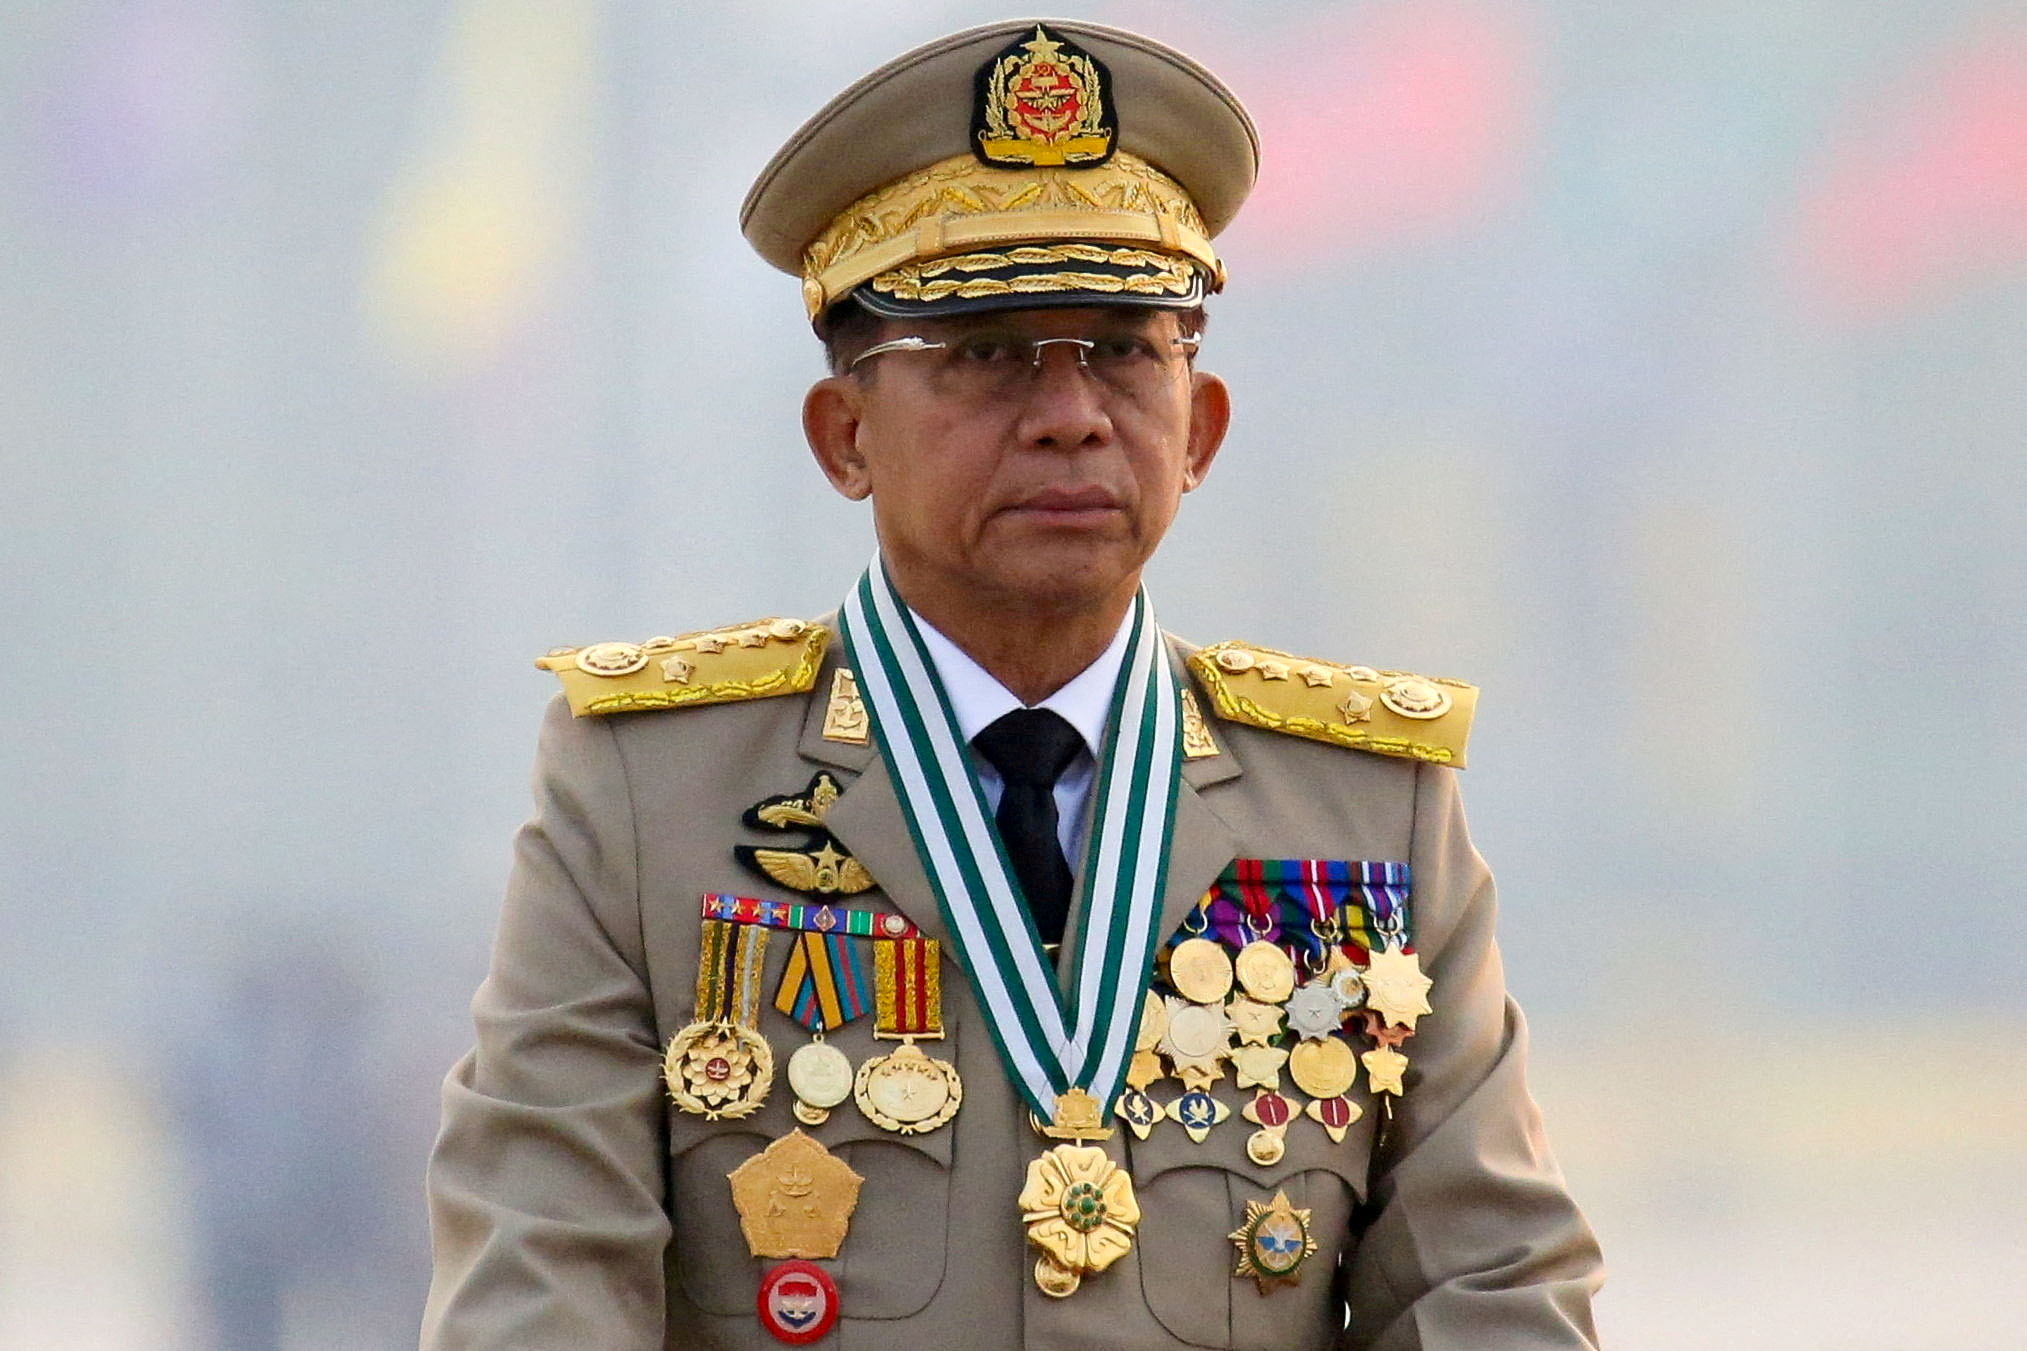 Myanmar’s junta chief Senior General Min Aung Hlaing, who ousted the elected government in a coup, presides at an army parade on Armed Forces Day in Naypyitaw, Myanmar, March 27, 2021. REUTERS/Stringer 